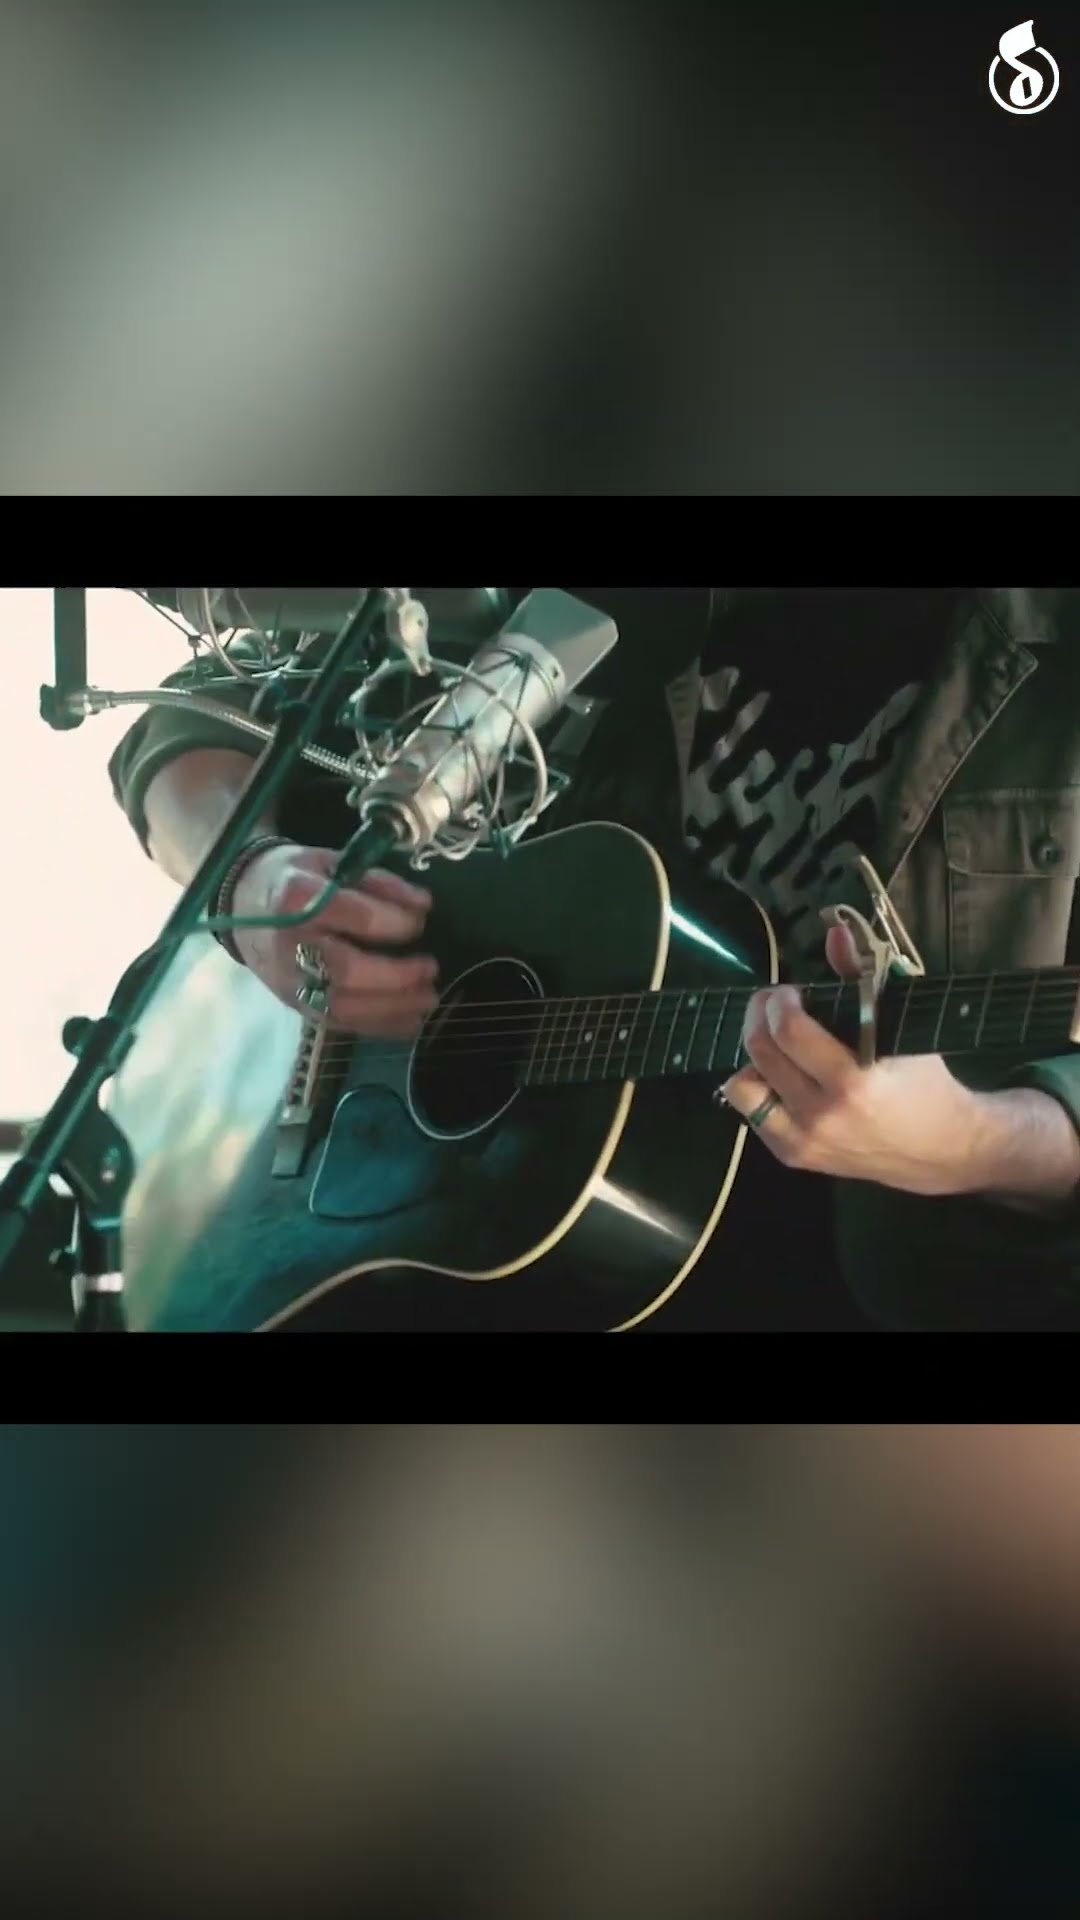 @zachwilliamsofficial performs his song "Chain Breaker" #shorts #music